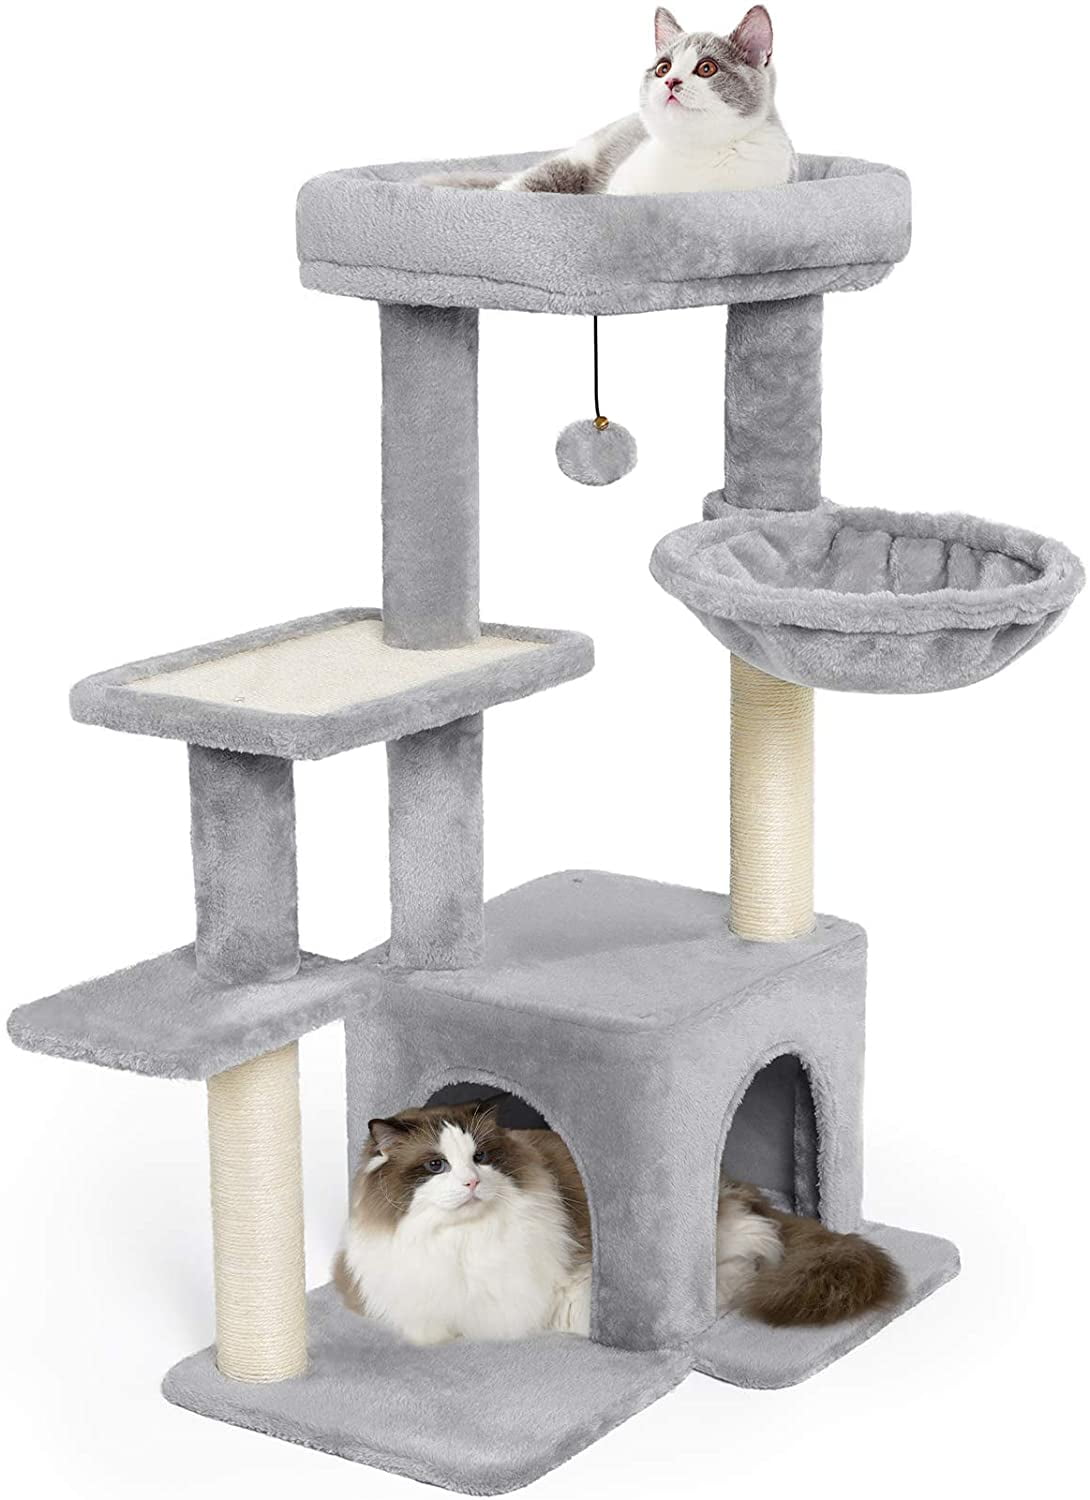 35.4 Multi-Level Cat Tree Cat Tower with Scratching Board Basket and Cat Condo Top Perch CATROMANCE Cat Tree Cat Activity Tree with Sisal-Covered Posts Cat Play House for Indoor Cats Kittens 